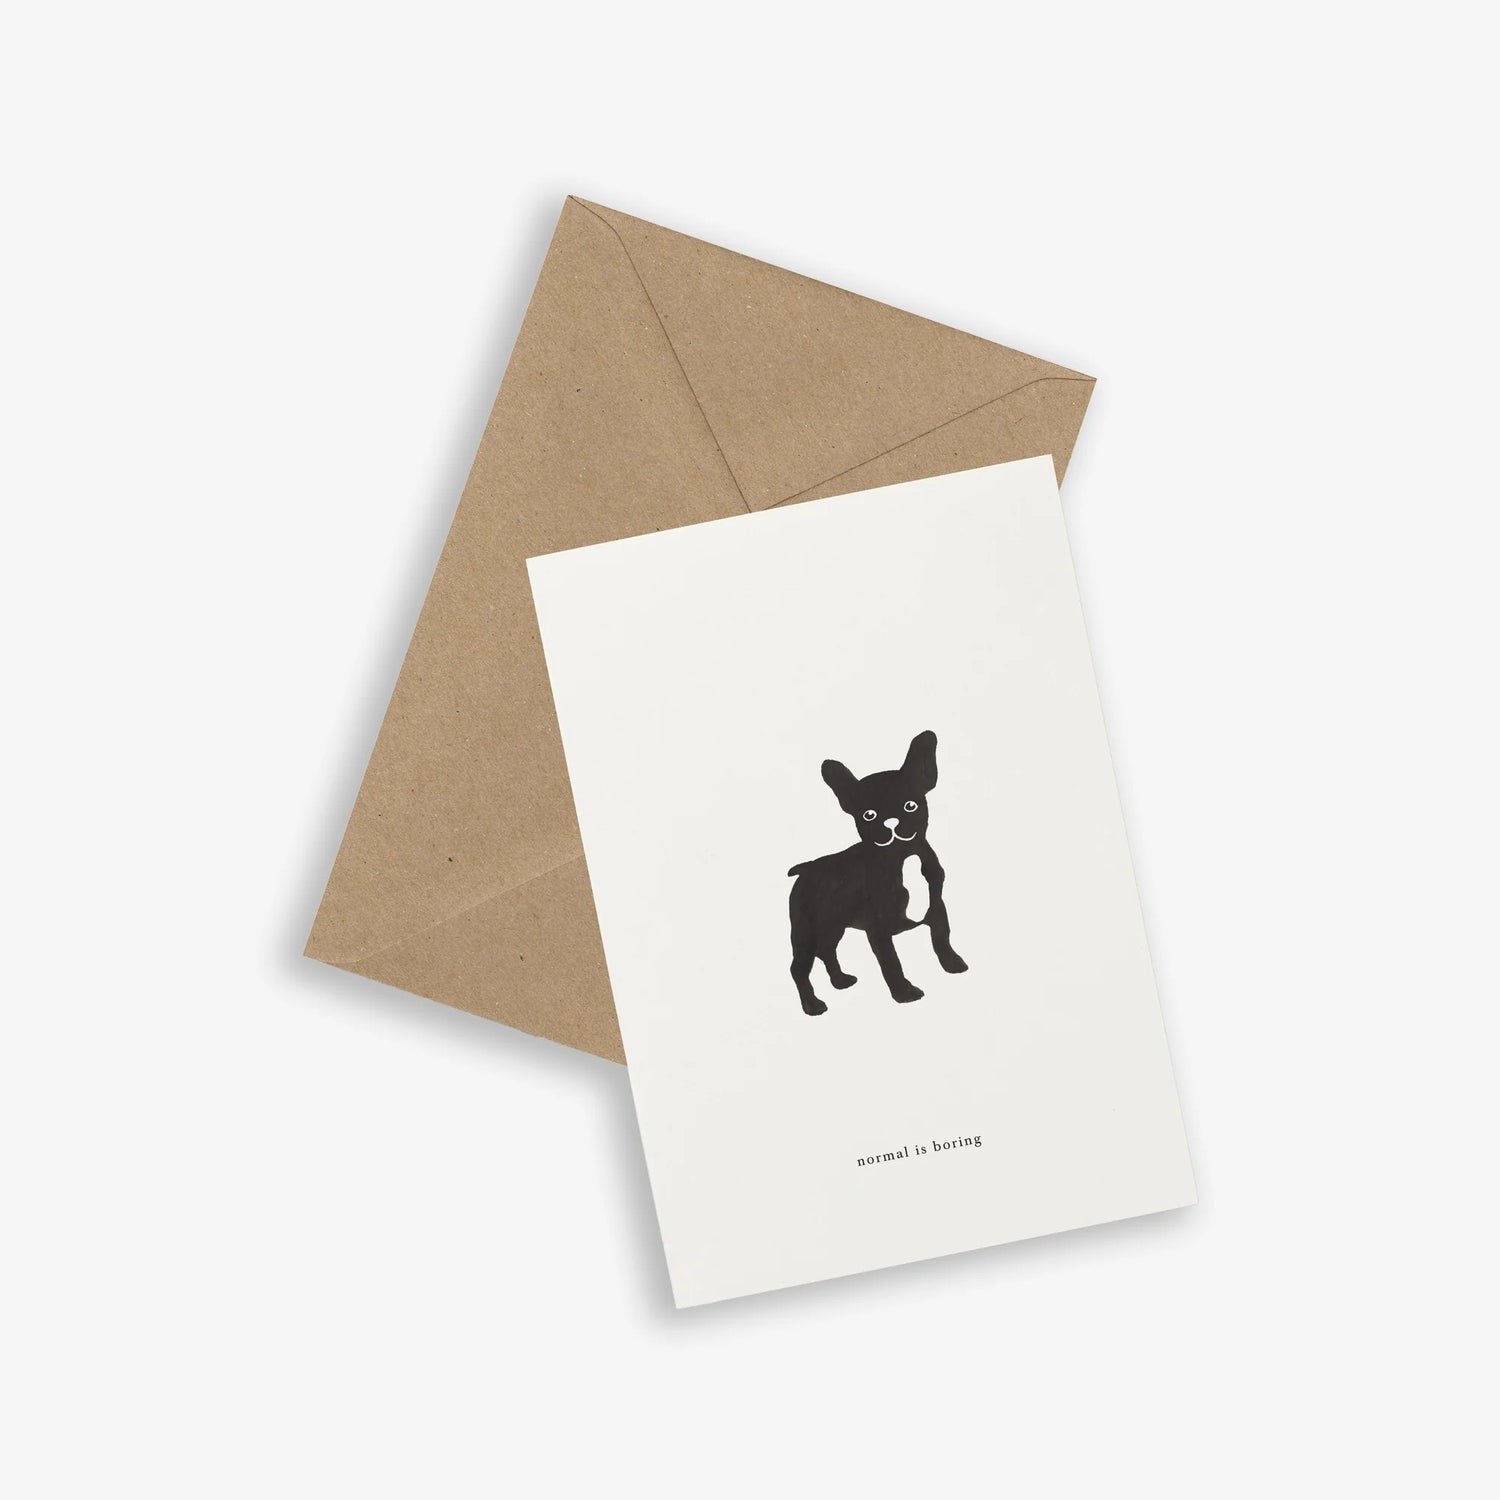 Frenchie (normal is boring) Love card